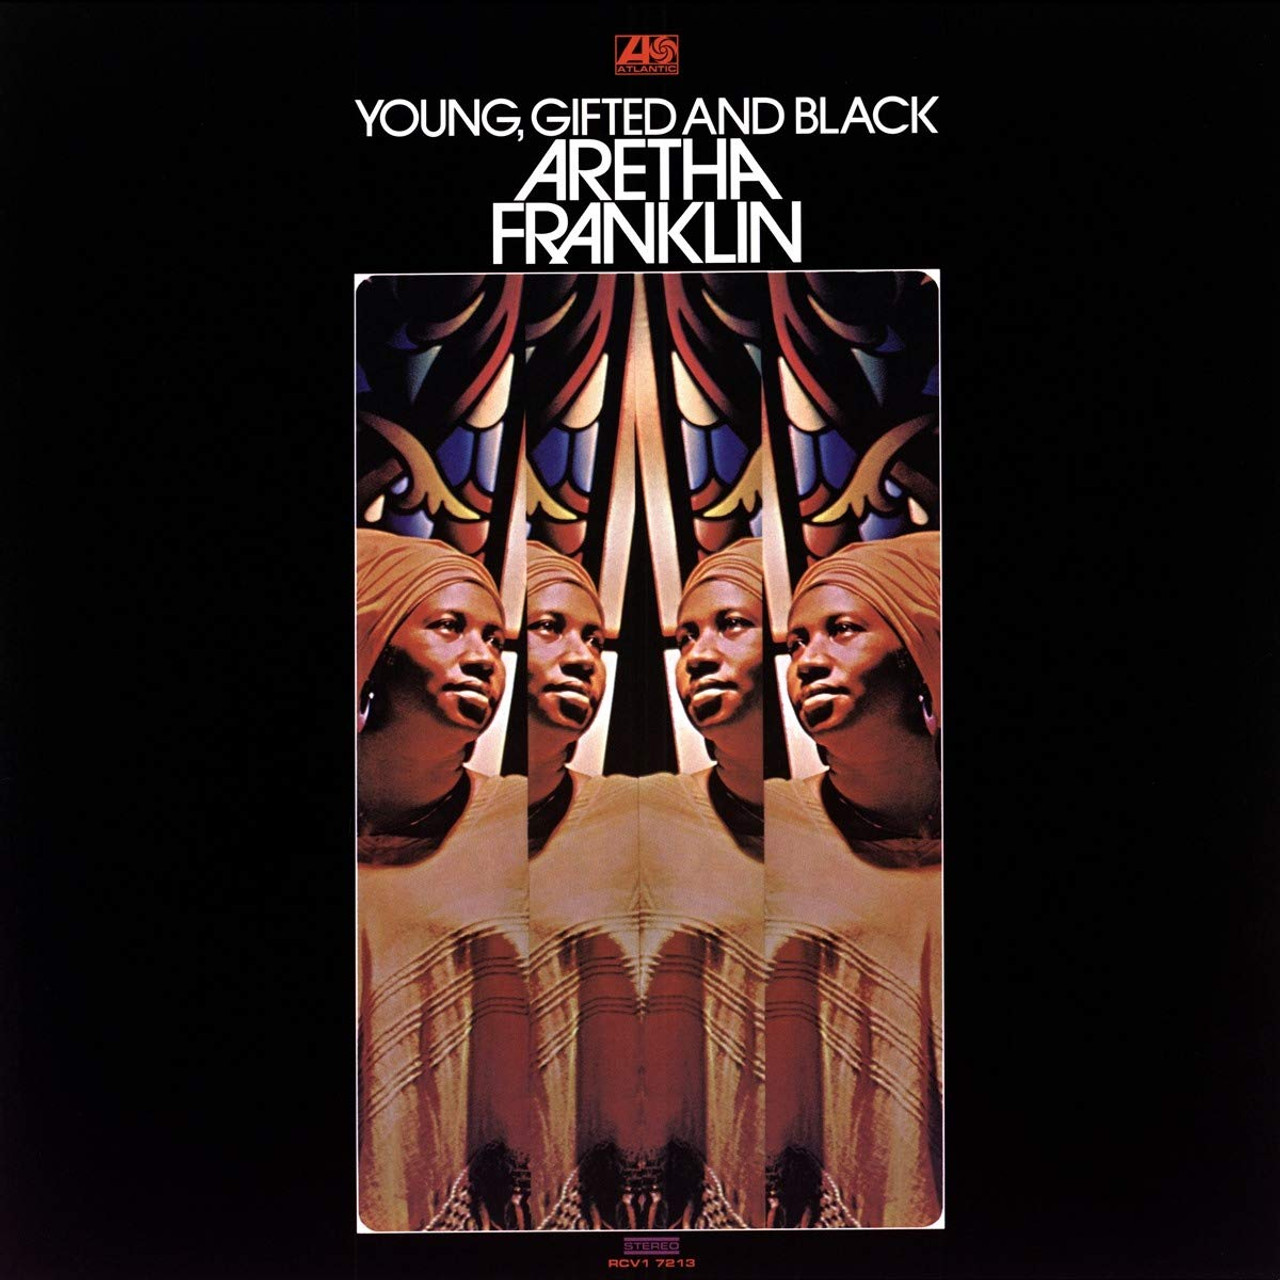 Pop-Rock Vinyl Aretha Franklin: Young, Gifted And Black LP 180g Yellow,  Limited, Warner Music 349784516, EAN 603497845163, Limited